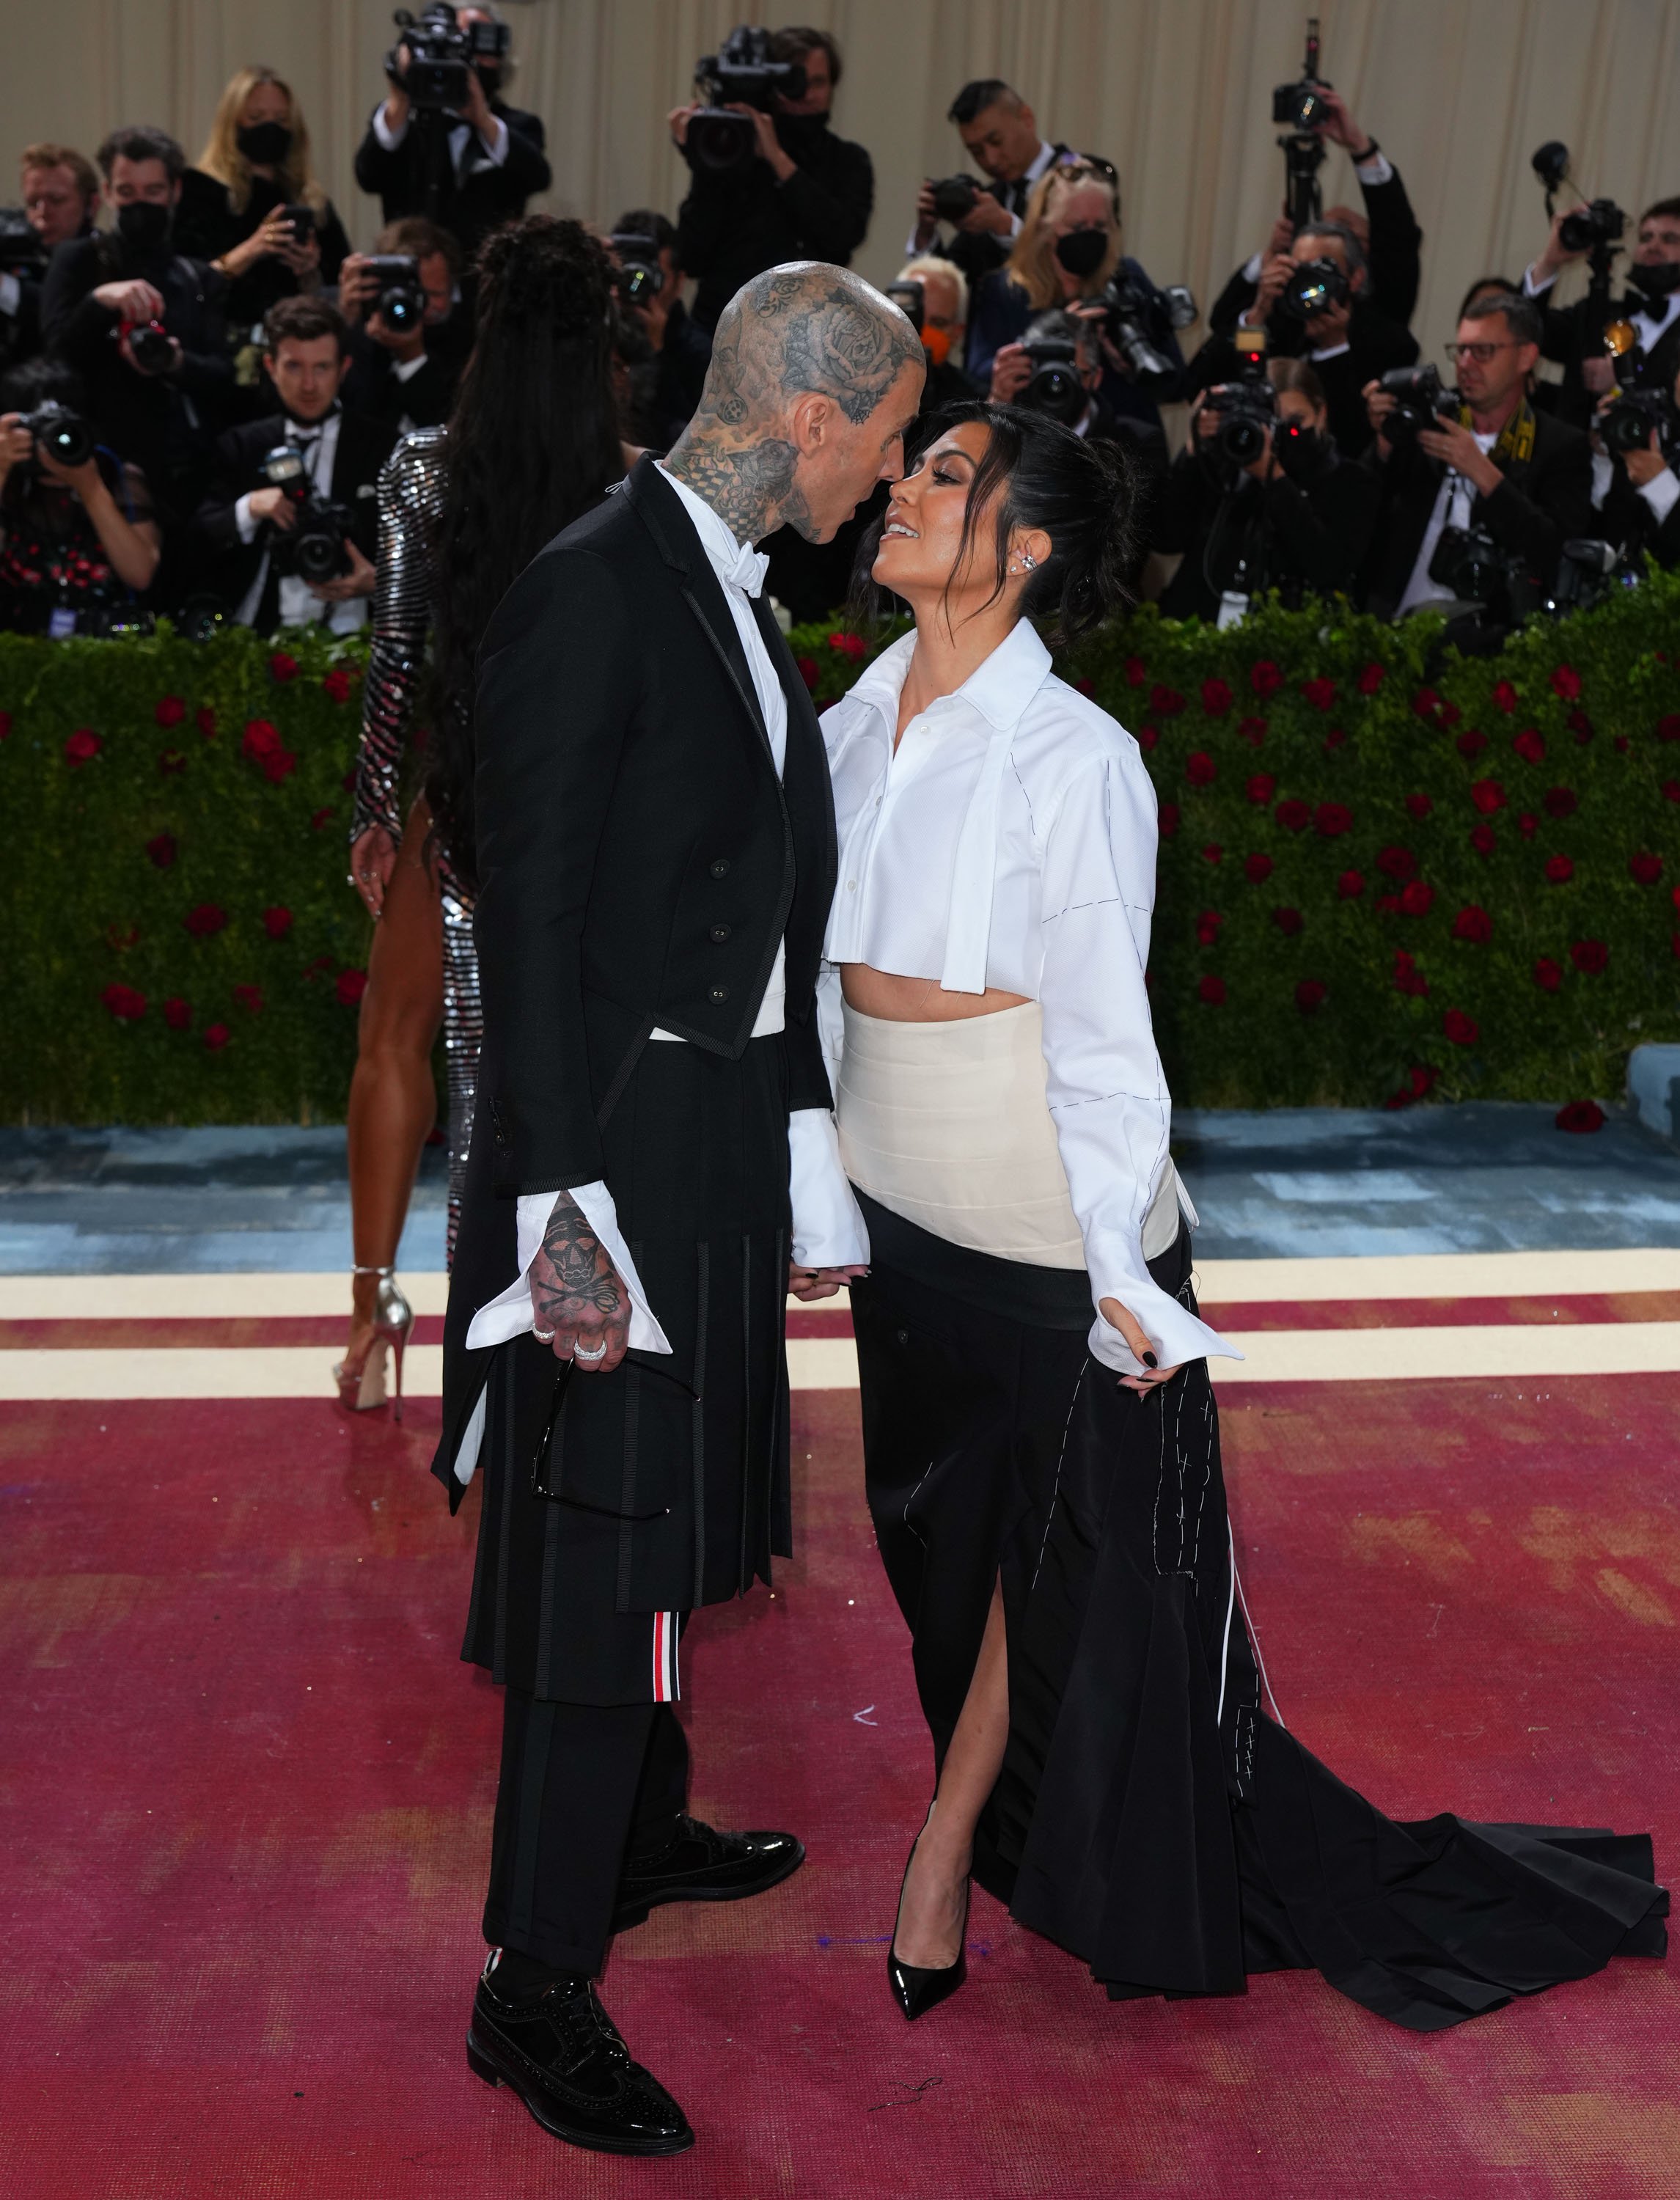 Travis Barker and Kourtney Kardashian attend the 2022 Met Gala in May 2022. | Source: Getty Images